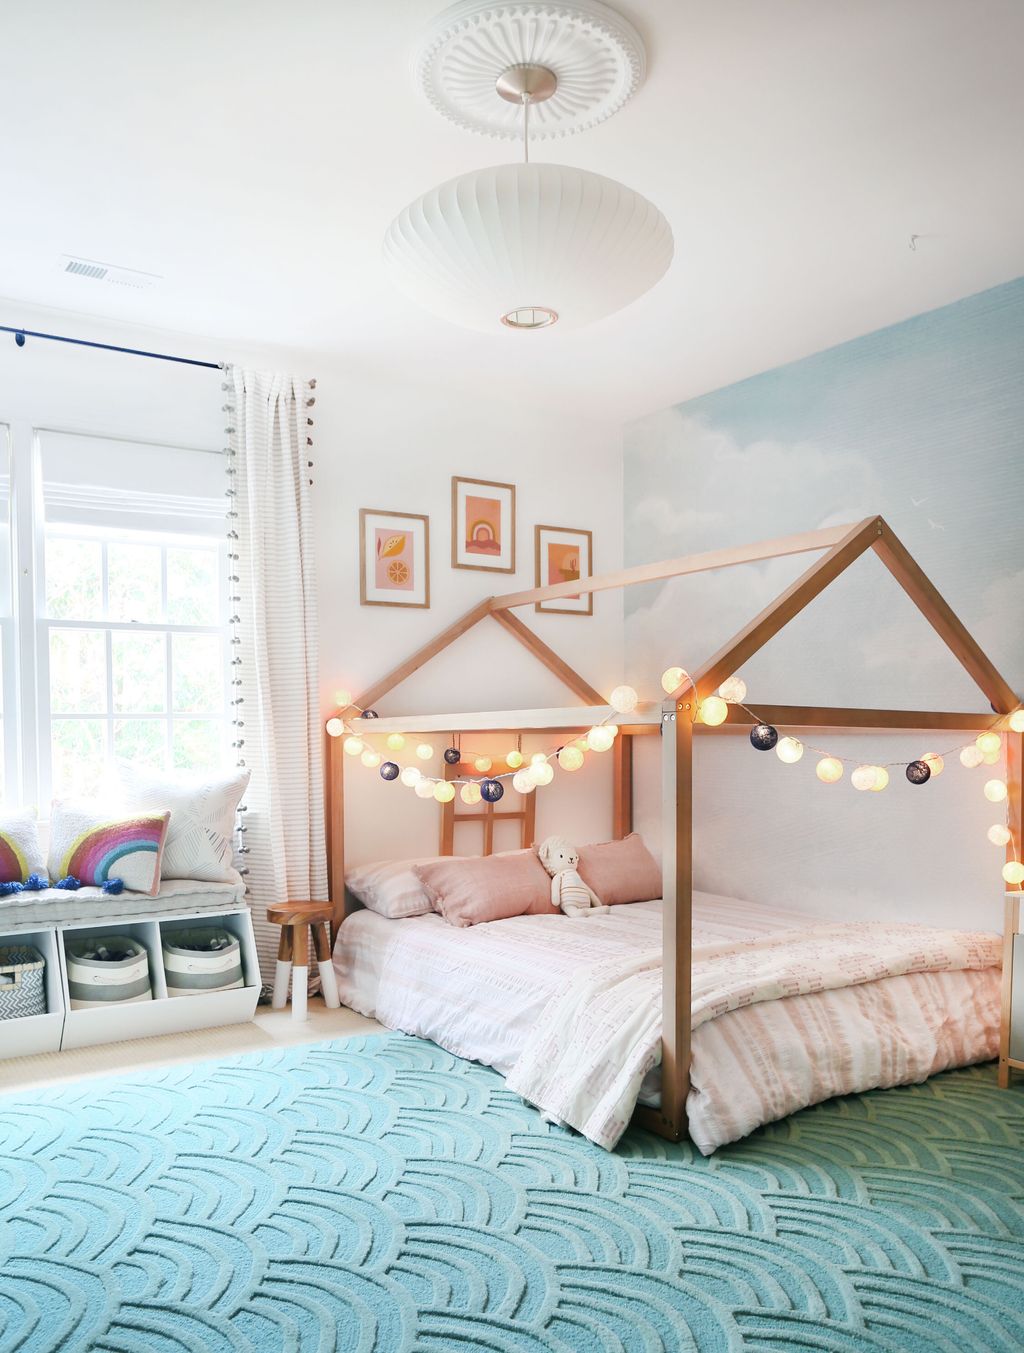 Creating a Dreamy and Whimsical Kids' Room